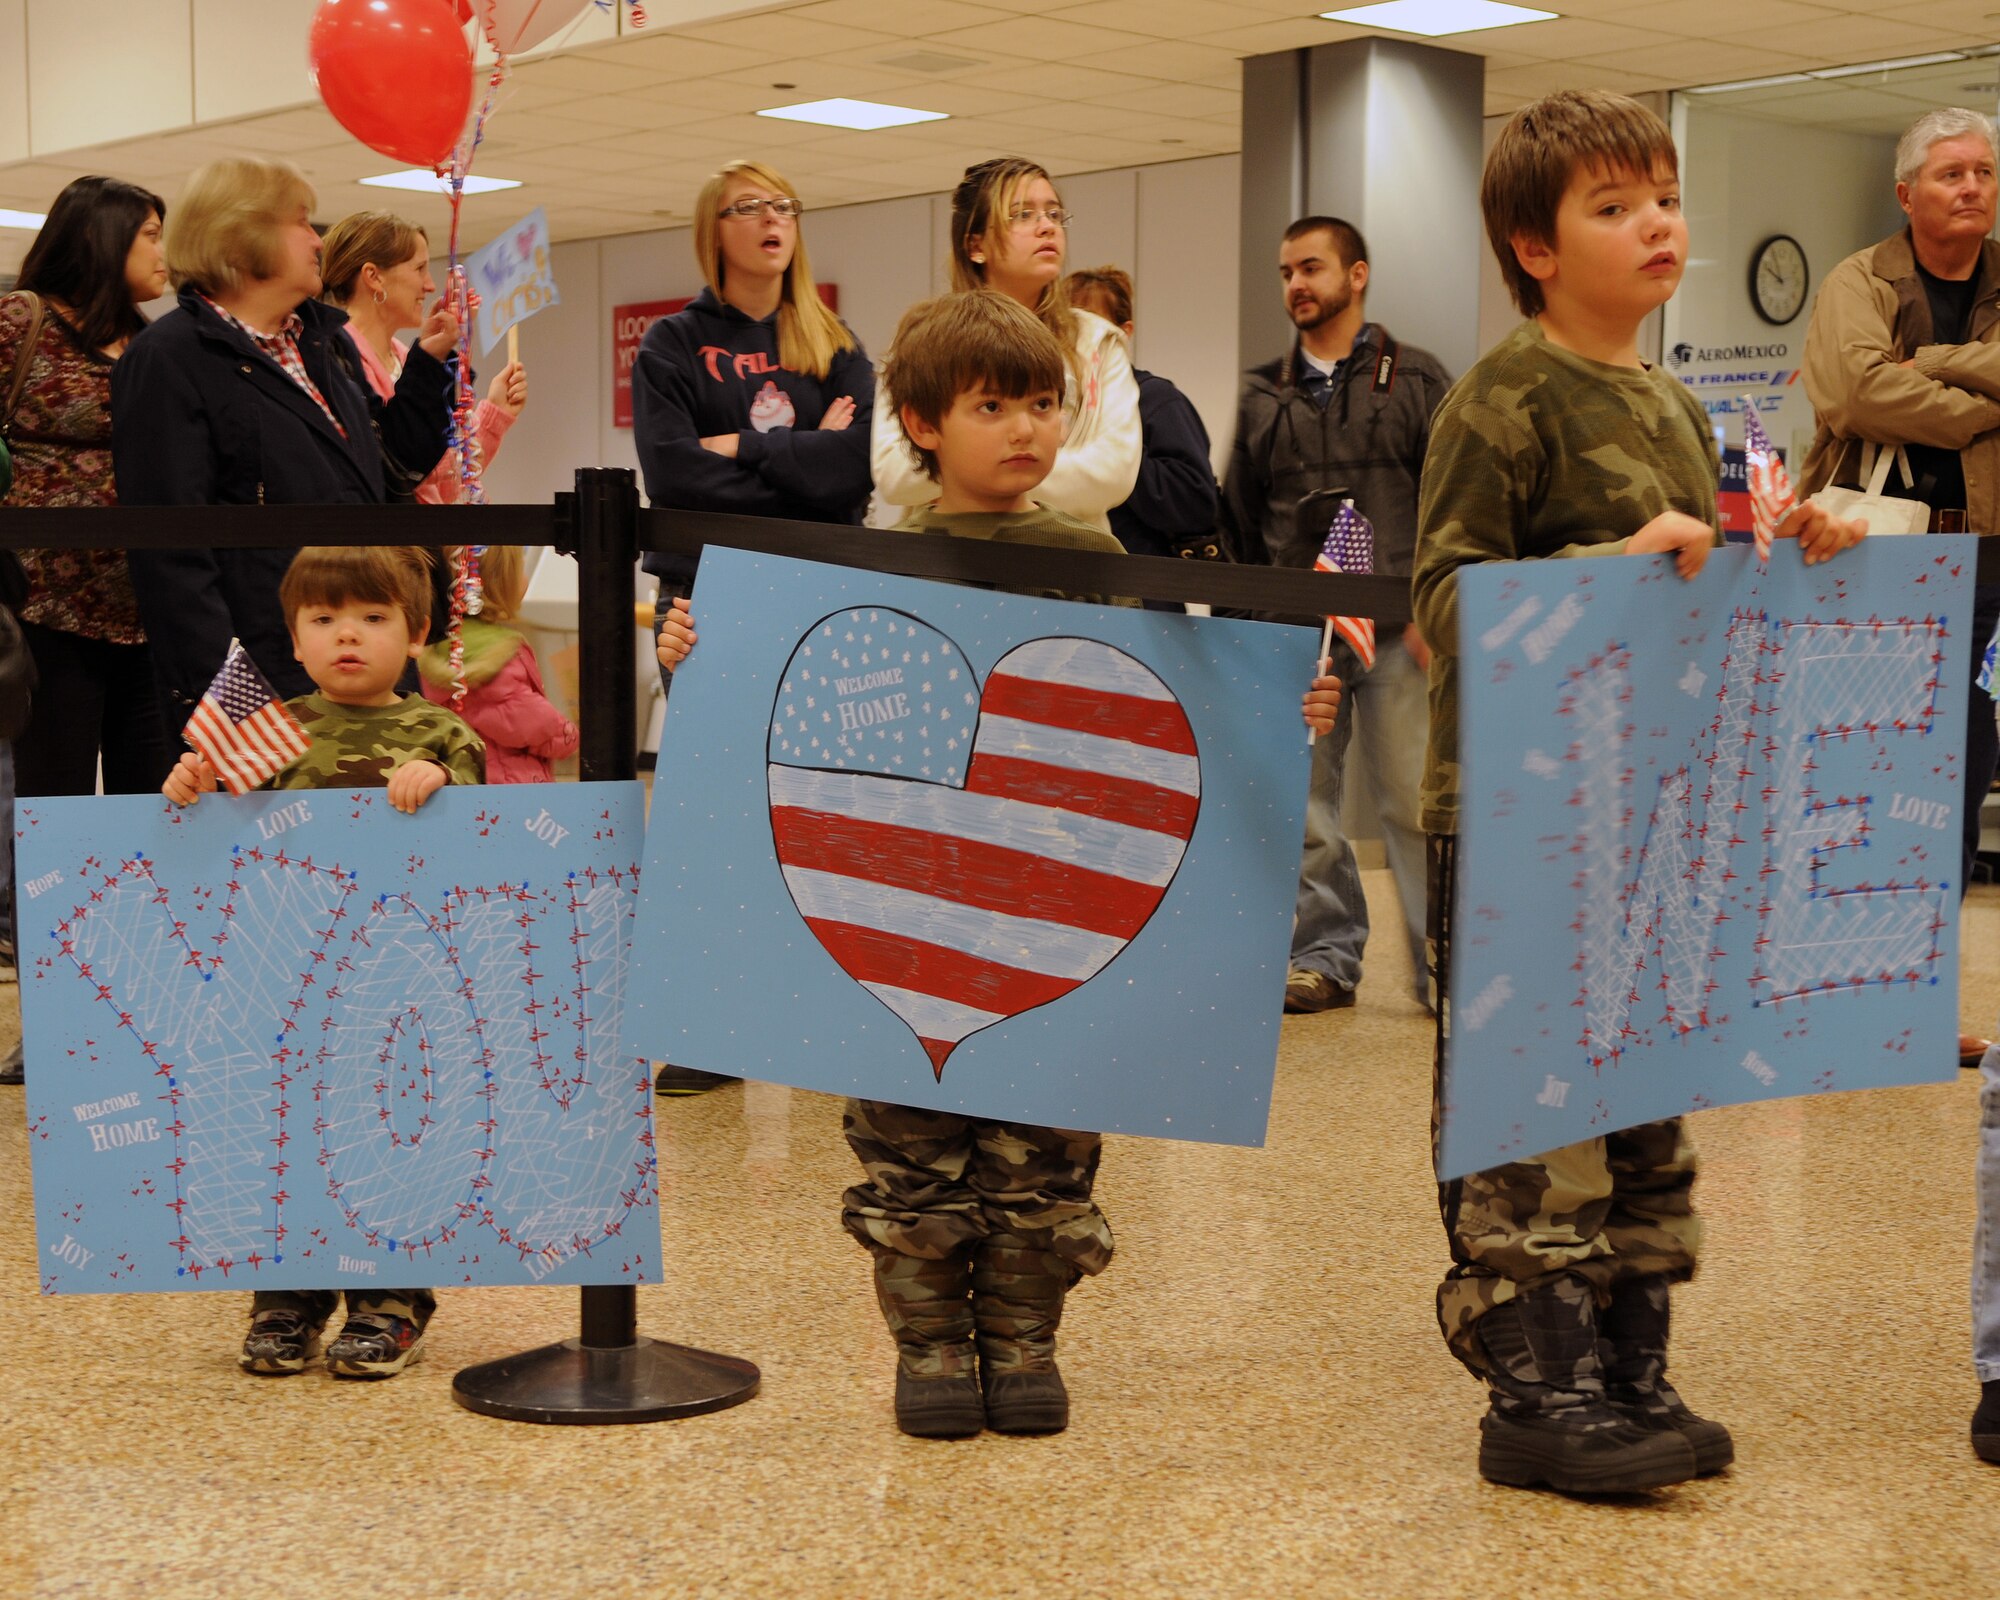 The three sons of Staff Sgt. Christian Ward waited to welcome home their dad as he returned from deployment at the Salt Lake City International Airport, Nov. 16. Ward and eleven other members of the 130th Engineering Installation Squadron served a six-month deployment in support of Operation Enduring Freedom throughout several forward operating bases in Afghanistan. (U.S. Air Force photo by Senior Airman Lillian Harnden)(RELEASED)